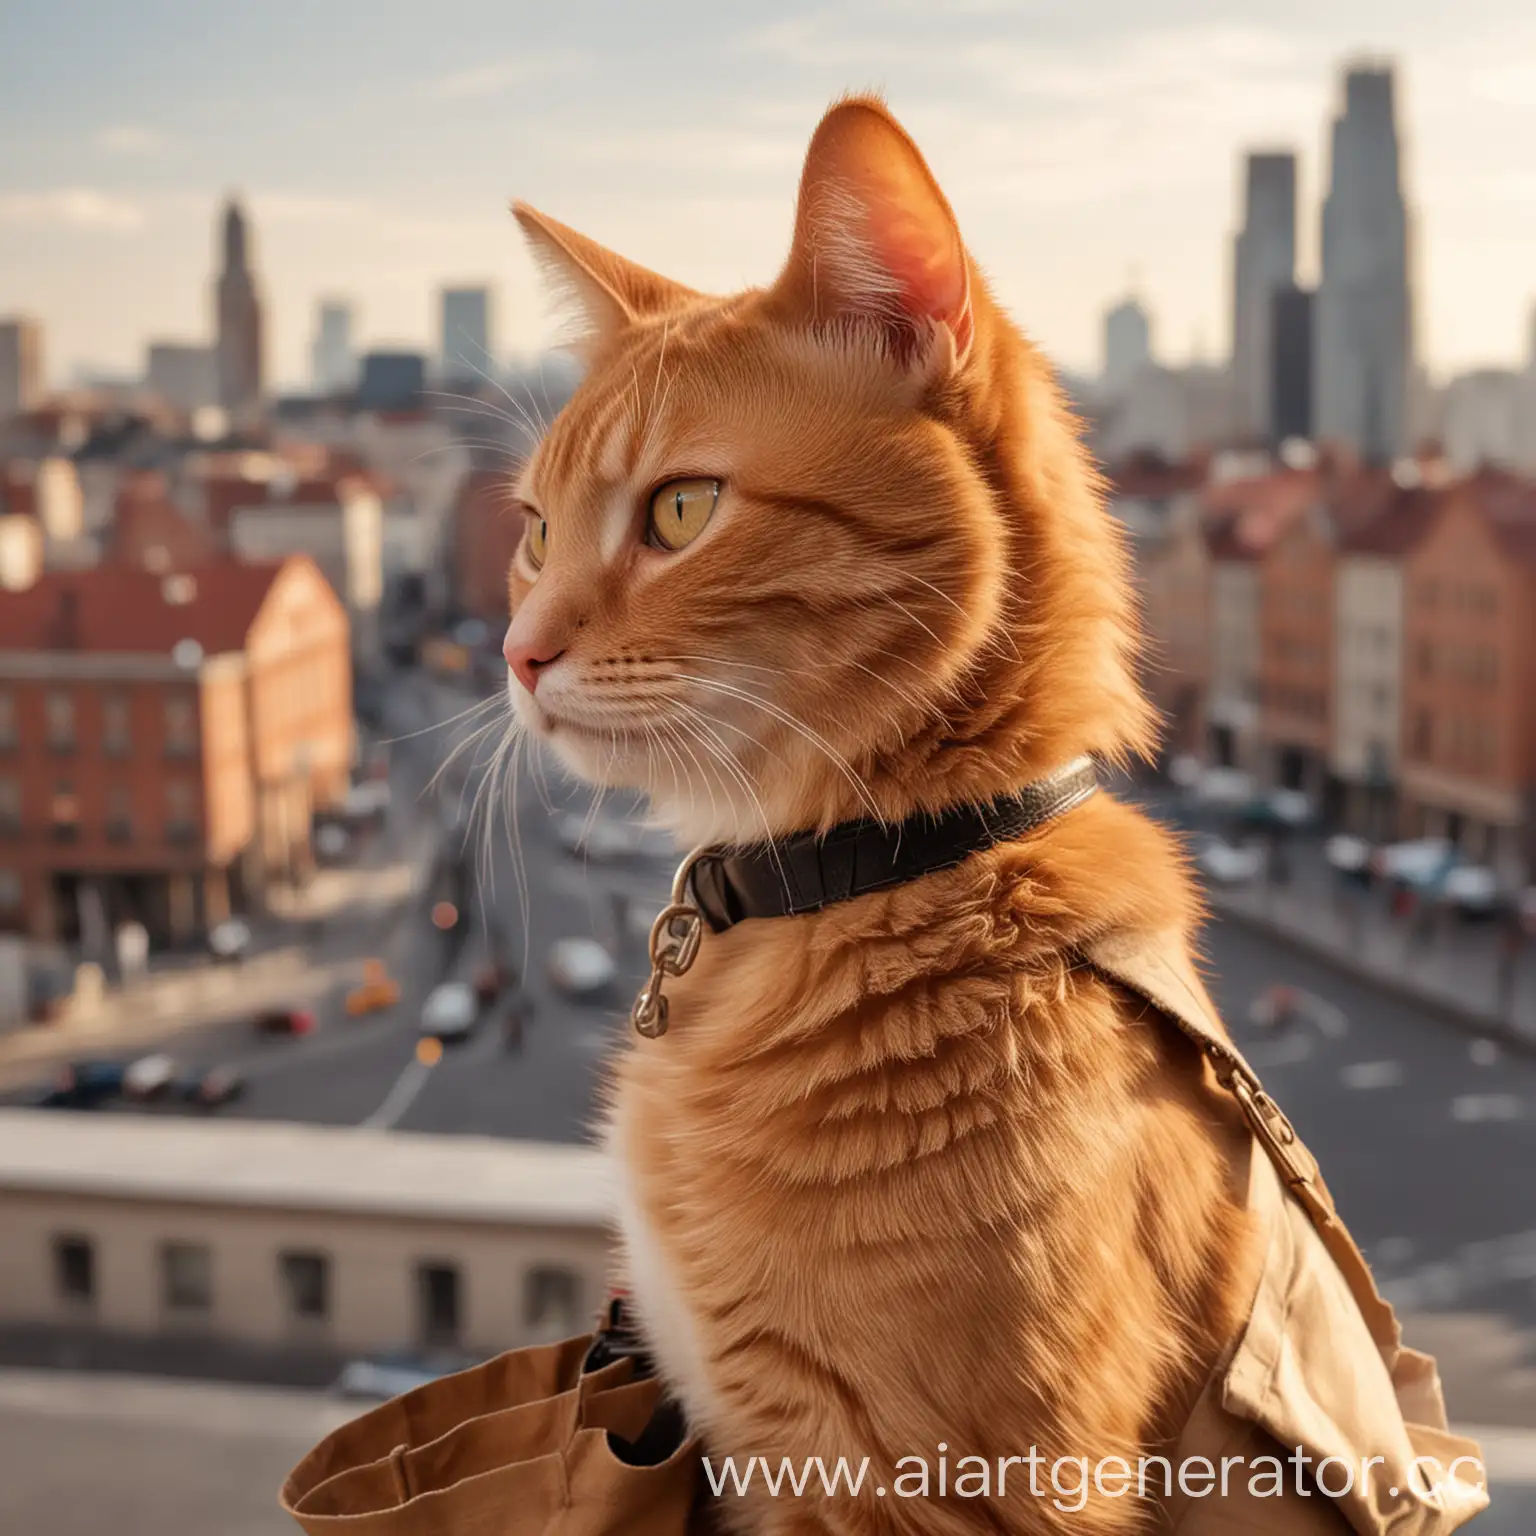 Ginger-Cat-With-Bag-Gazing-Across-Cityscape